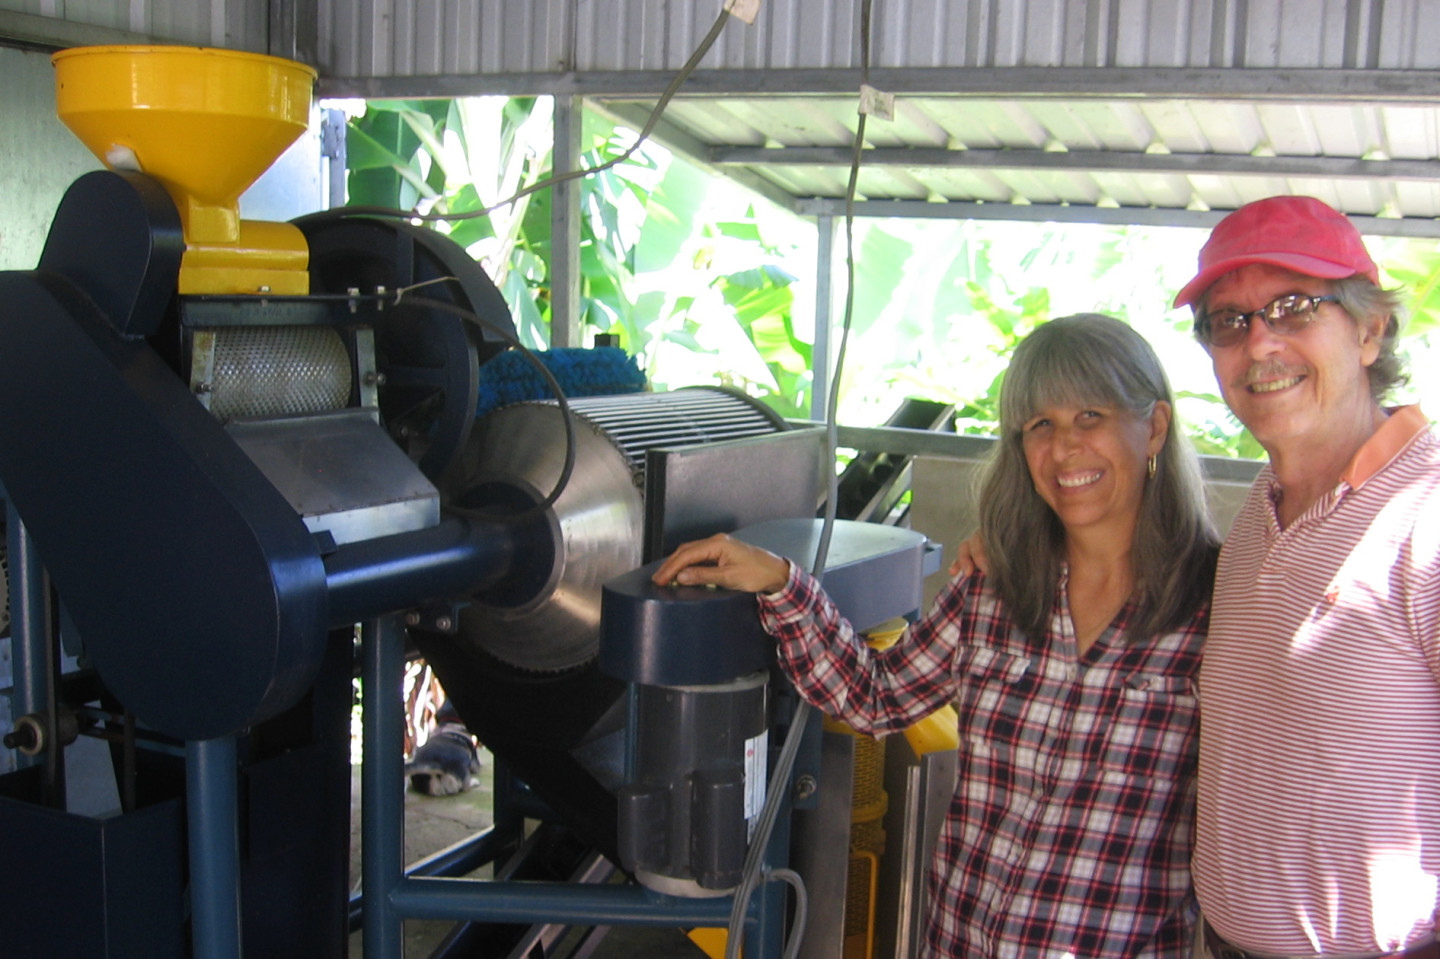 Elena Biamon and her husband, Miguel Sastre, have invested in this depulper and other equipment to process the coffee they grow.